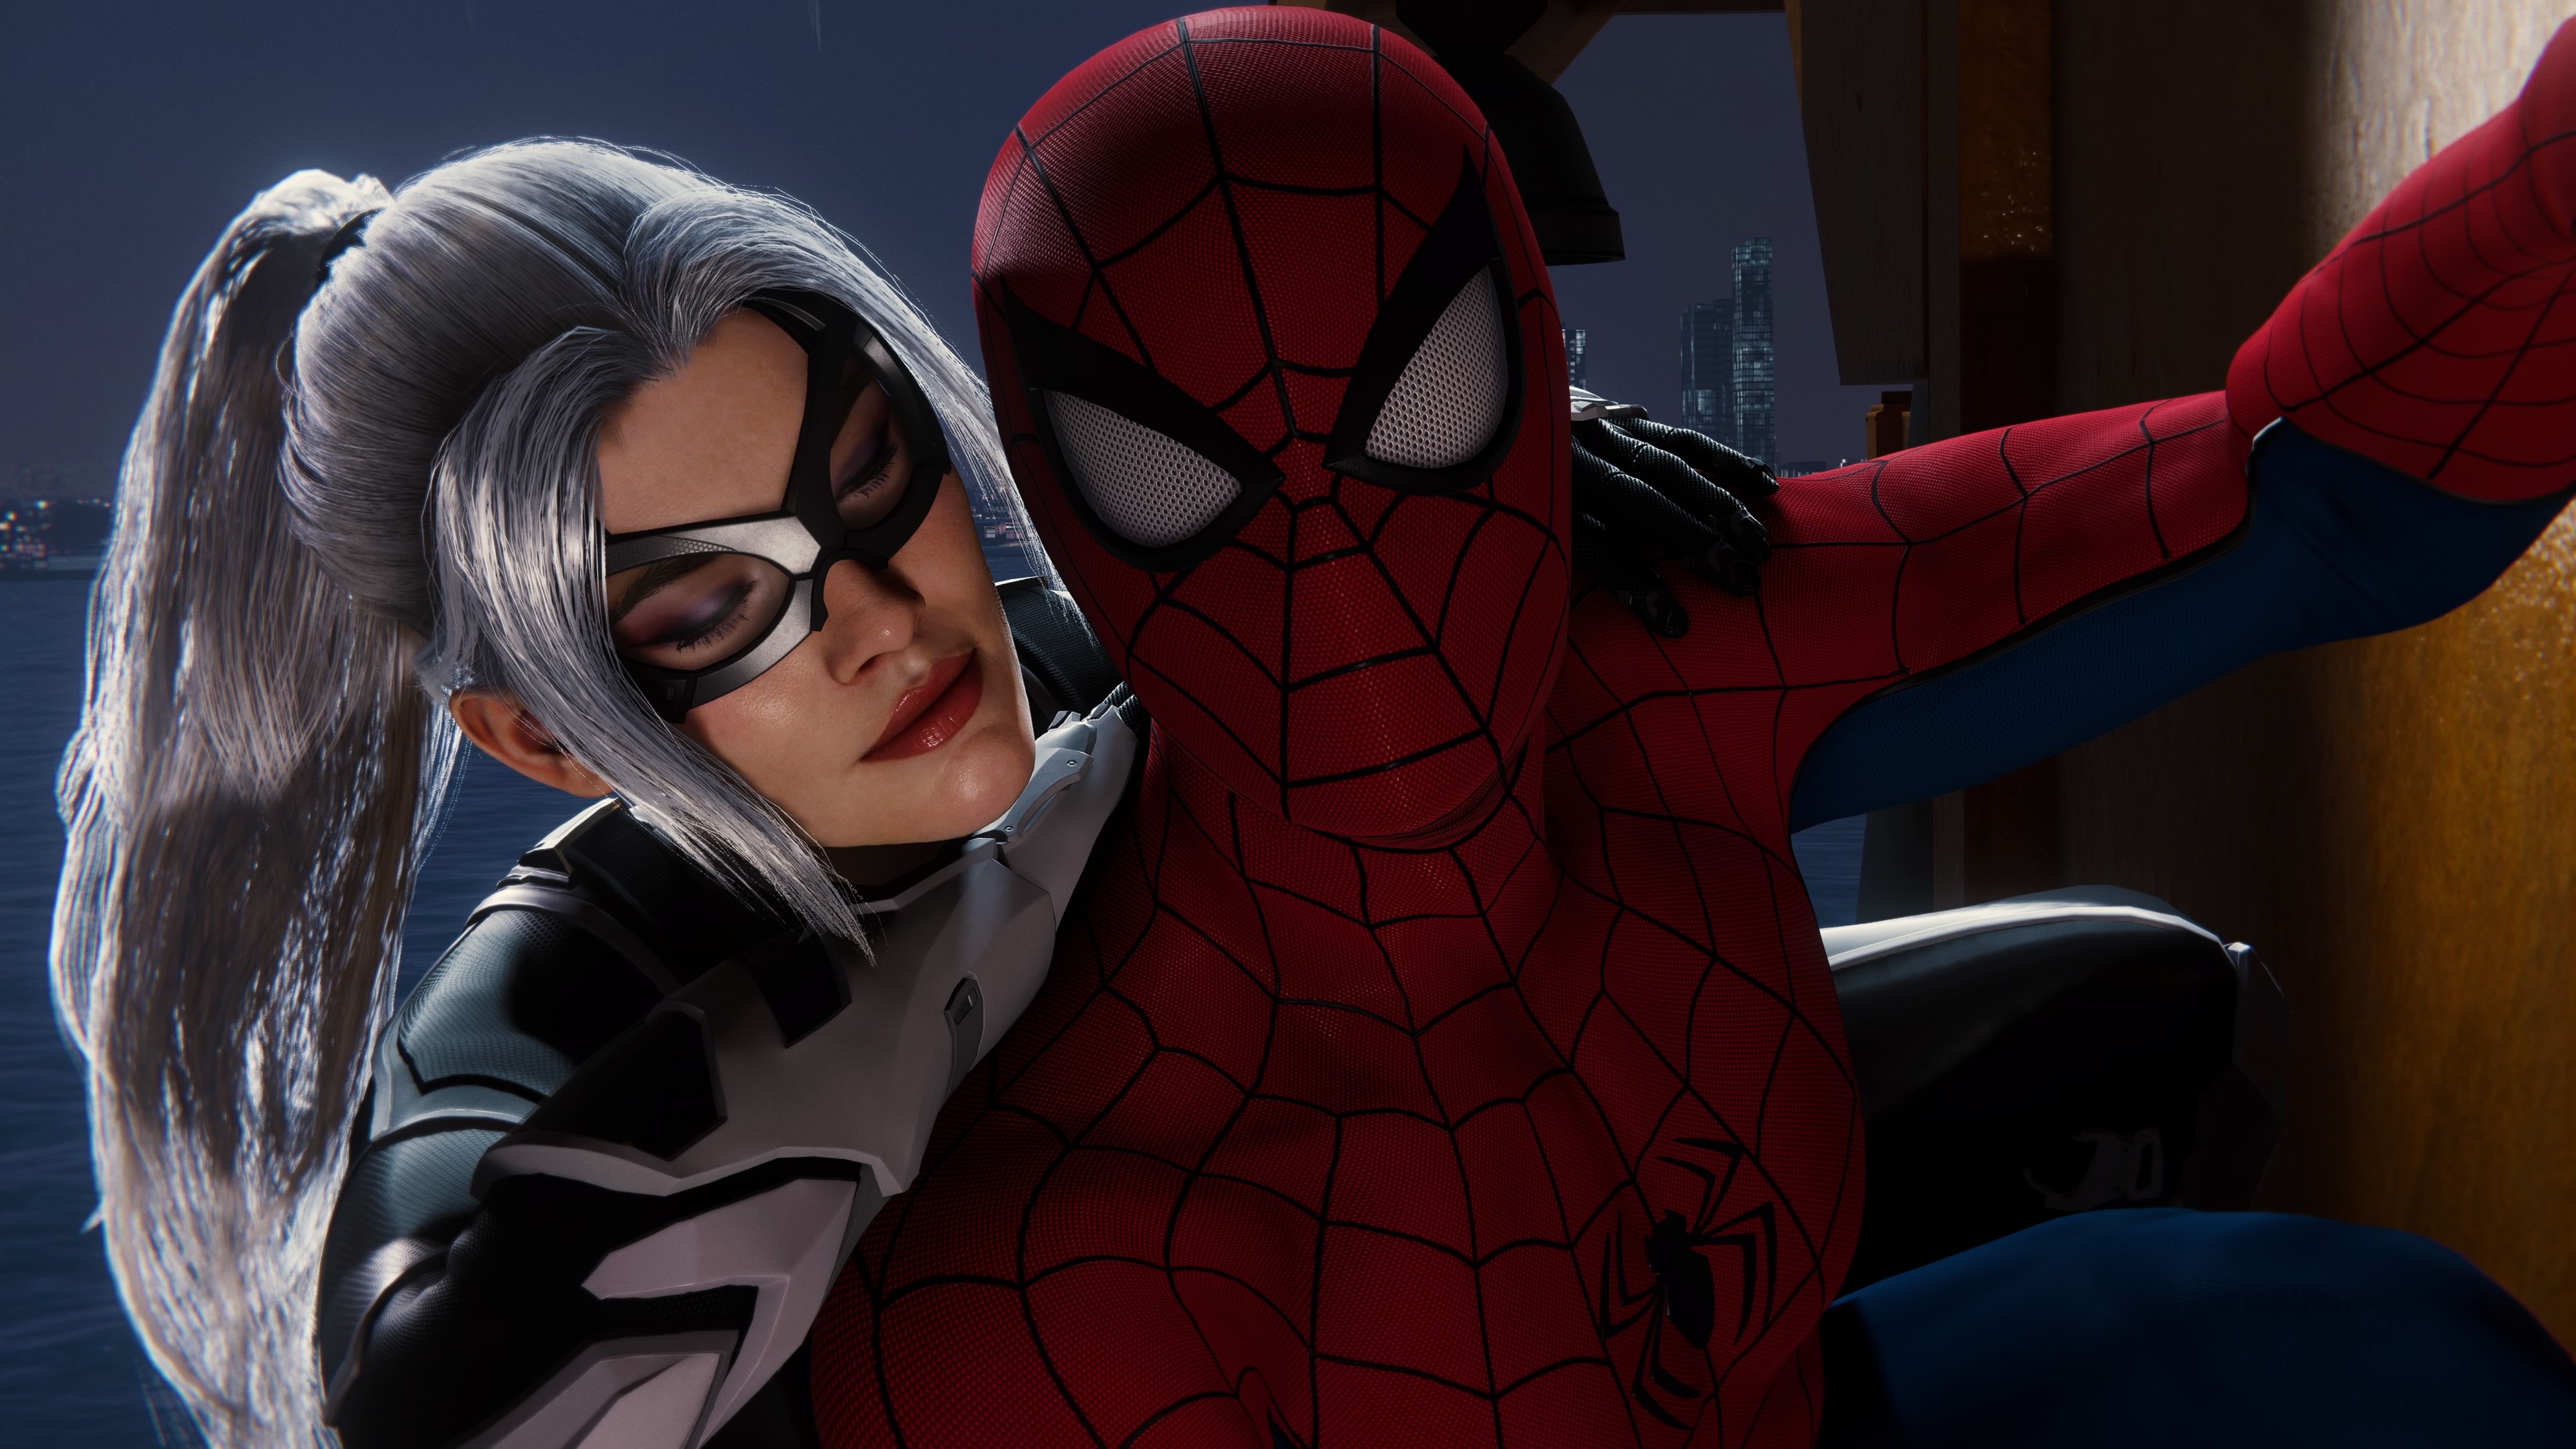 General 3840x2160 Spider-Man Marvel Cinematic Universe video games Black Cat Felicia Hardy Peter Parker Spider-Man (2018) Insomniac Games Marvel's Spider-Man